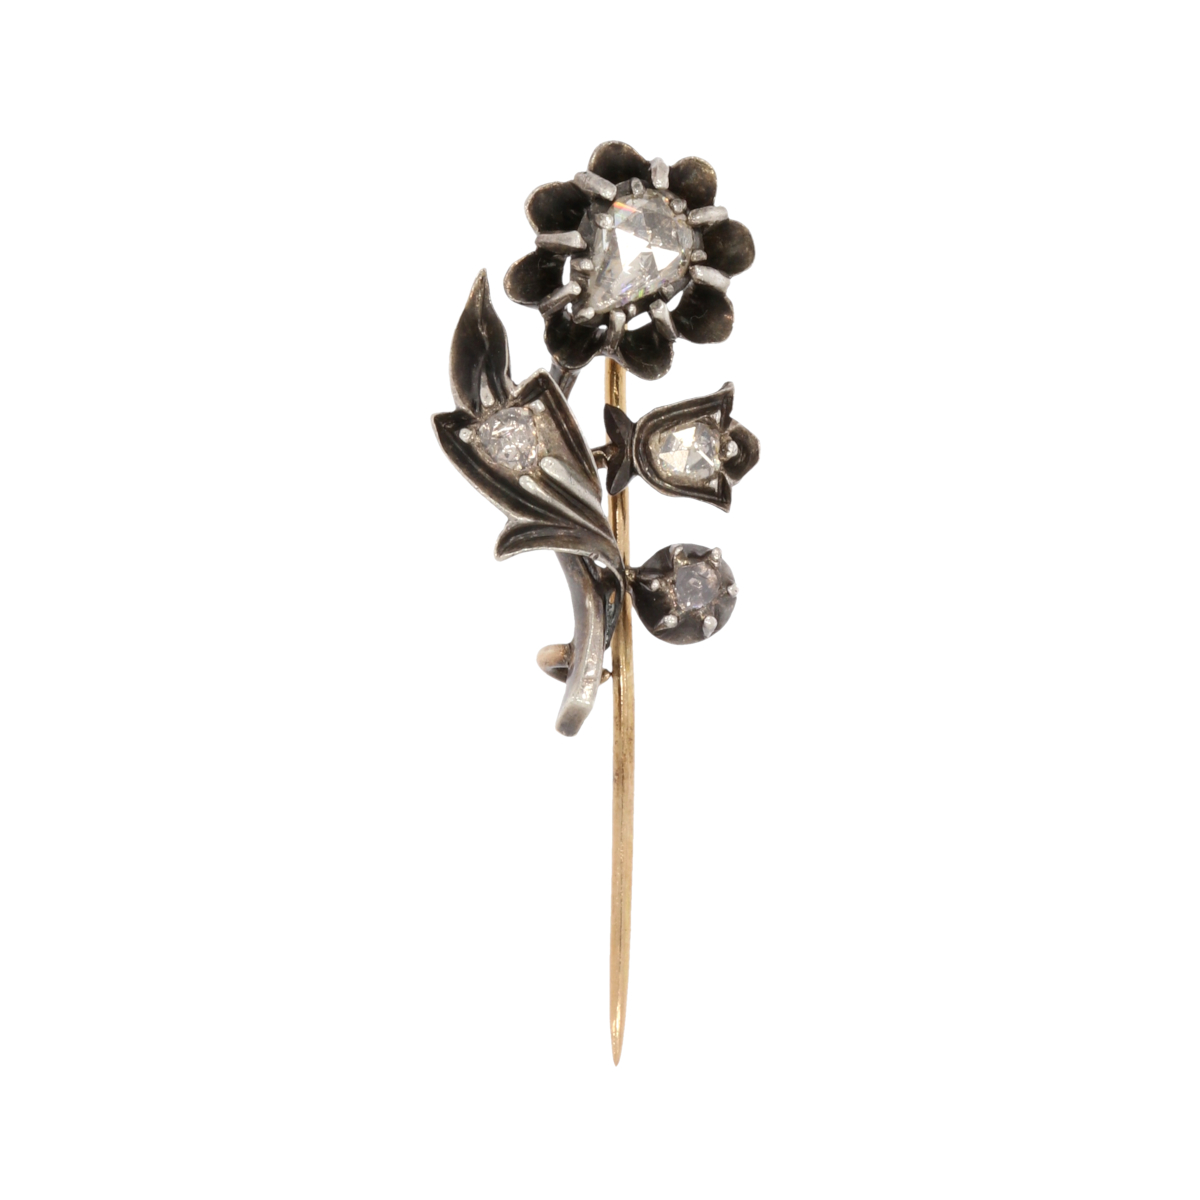 Brooch-pin in the form of a flower